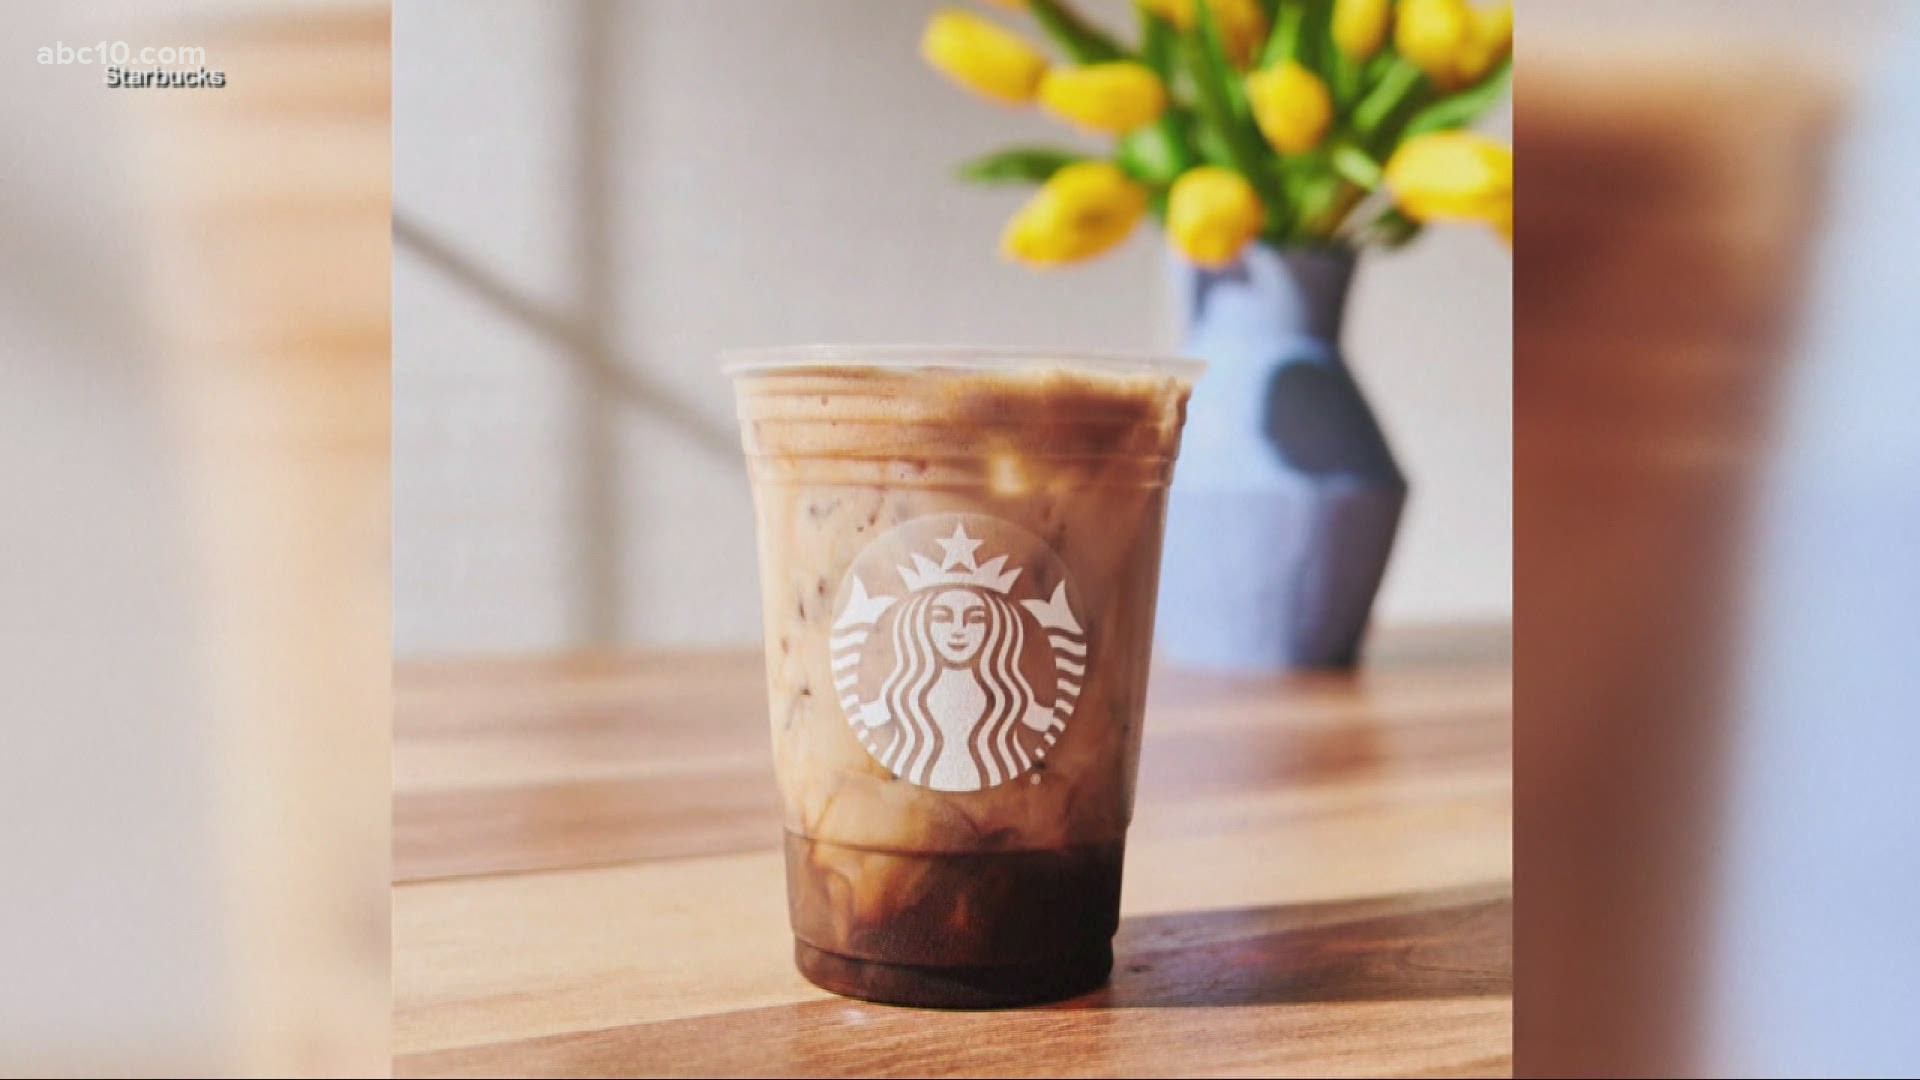 The iced shaken espresso is a new drink that will be available starting Tuesday.